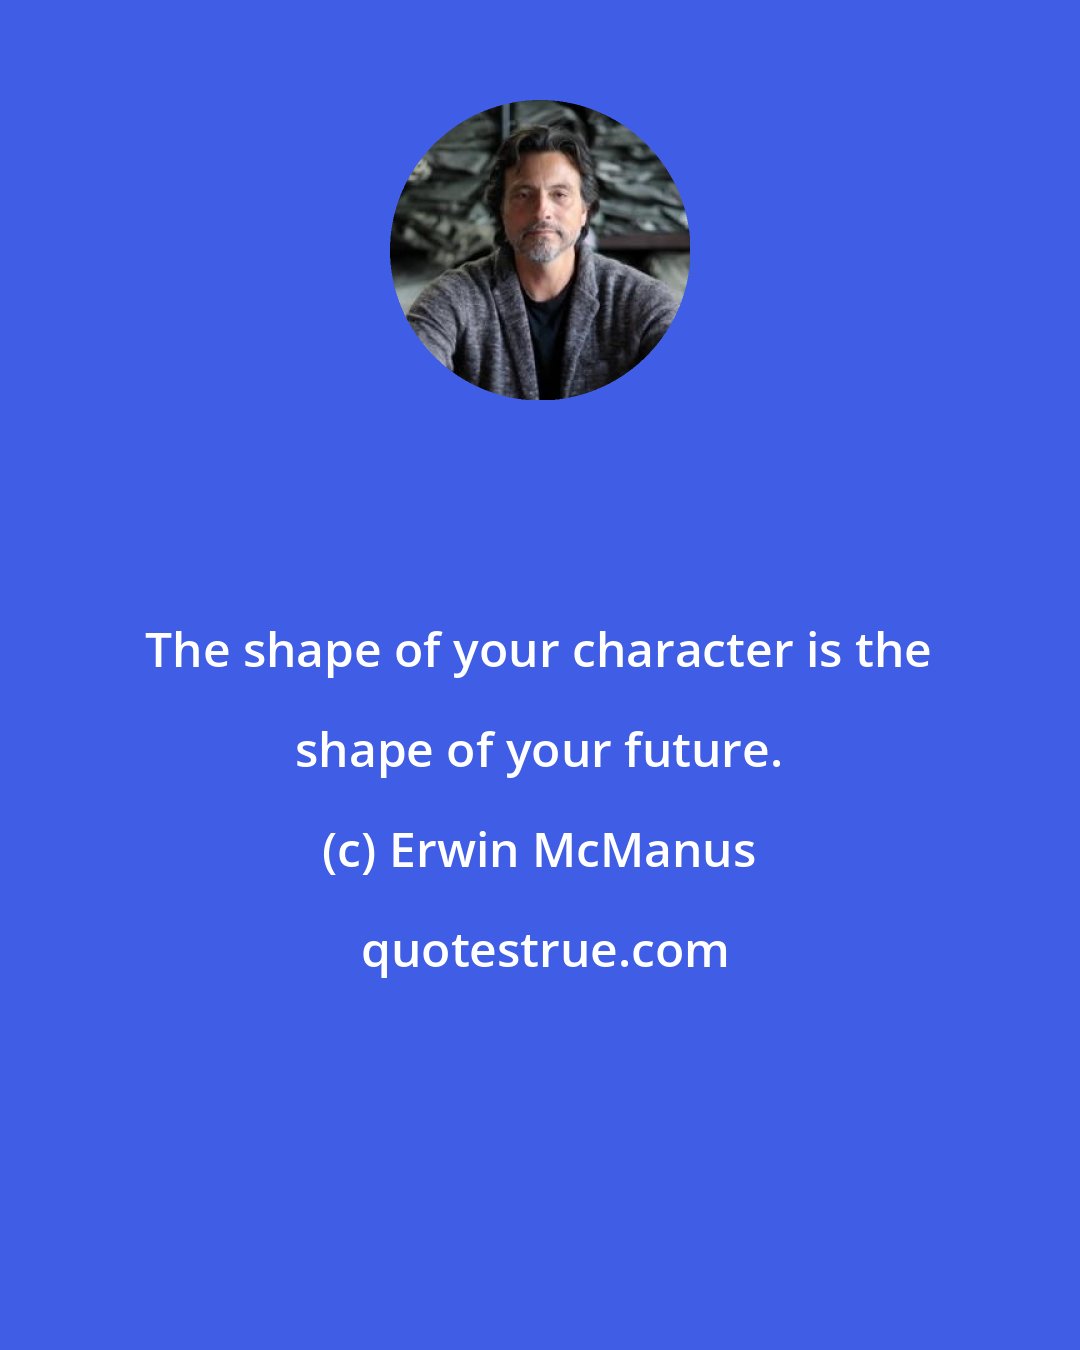 Erwin McManus: The shape of your character is the shape of your future.